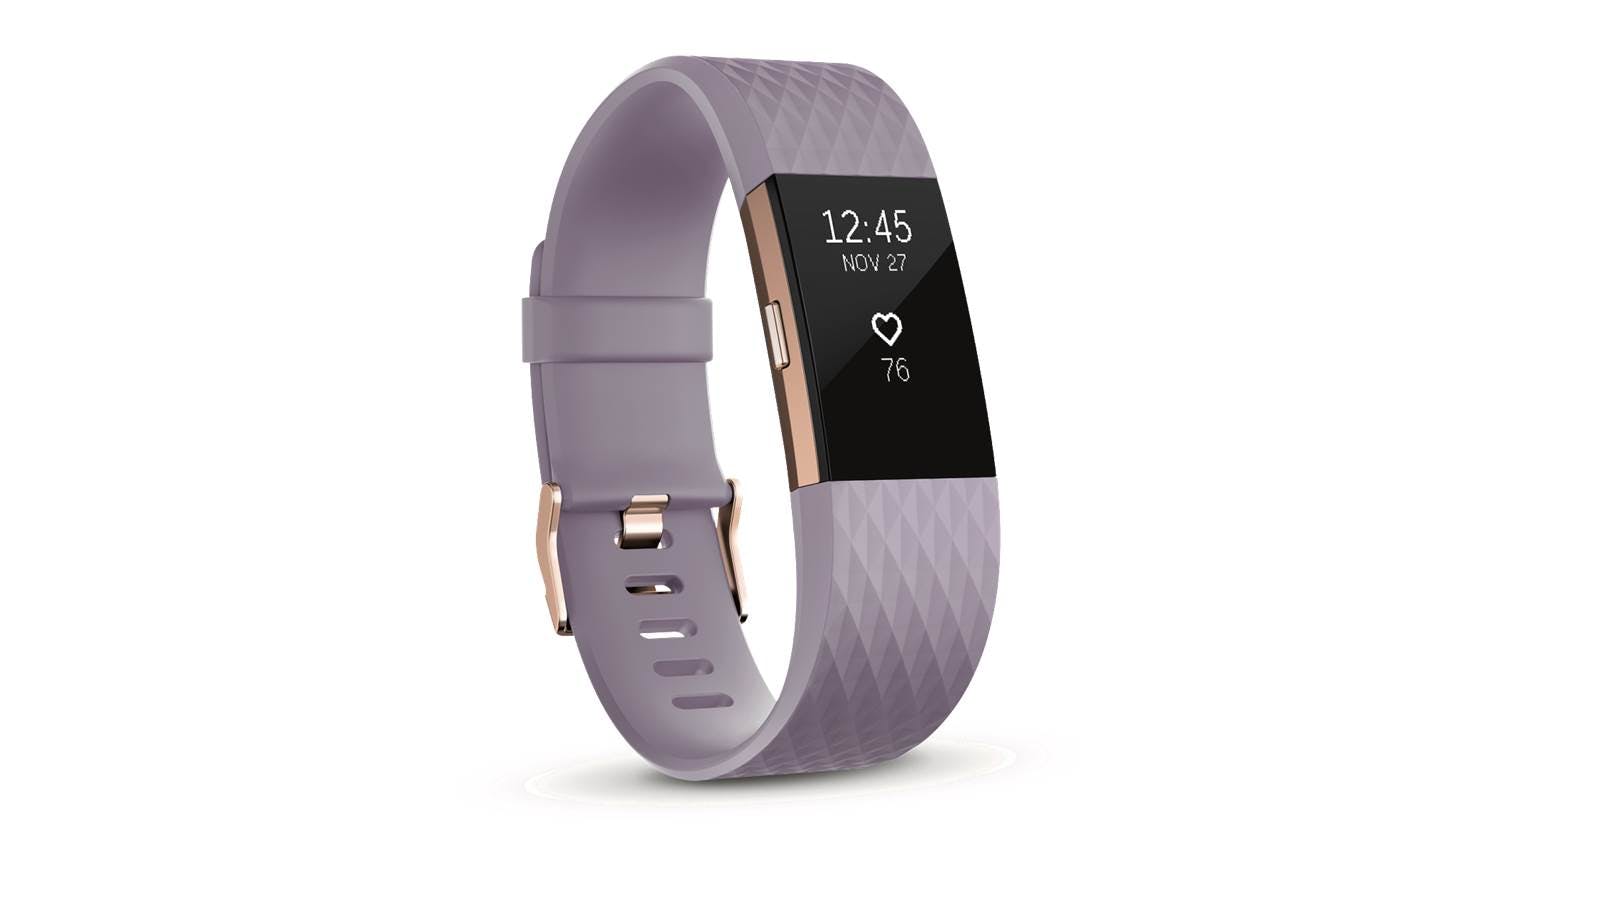 fitbit charge 2 rose gold